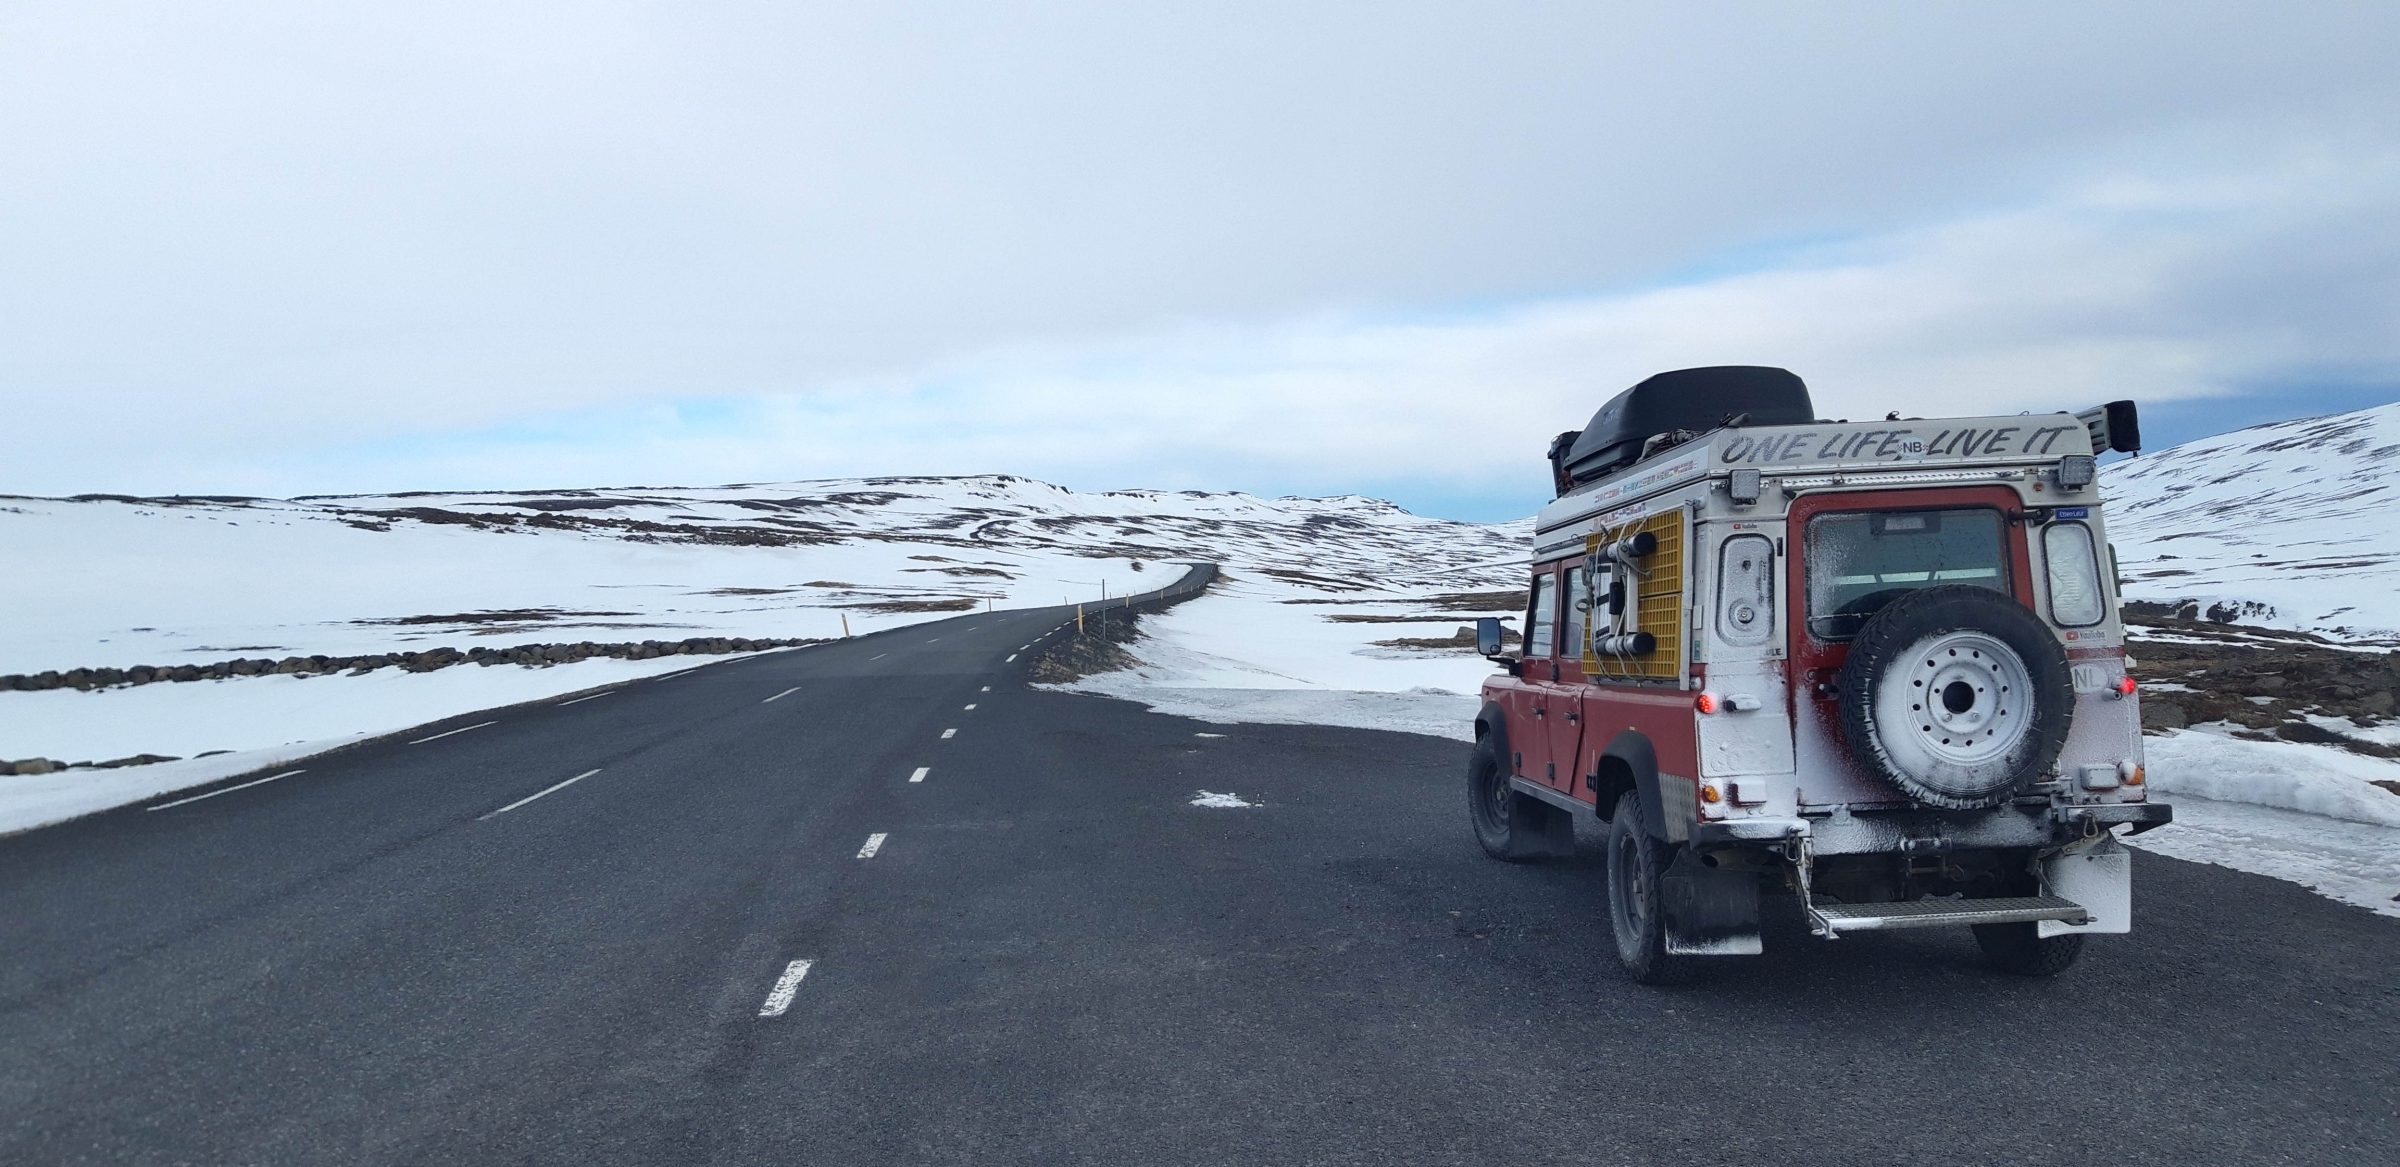 Day 2 in Iceland, a small snow storm | Iceland and Faroe Islands in winter